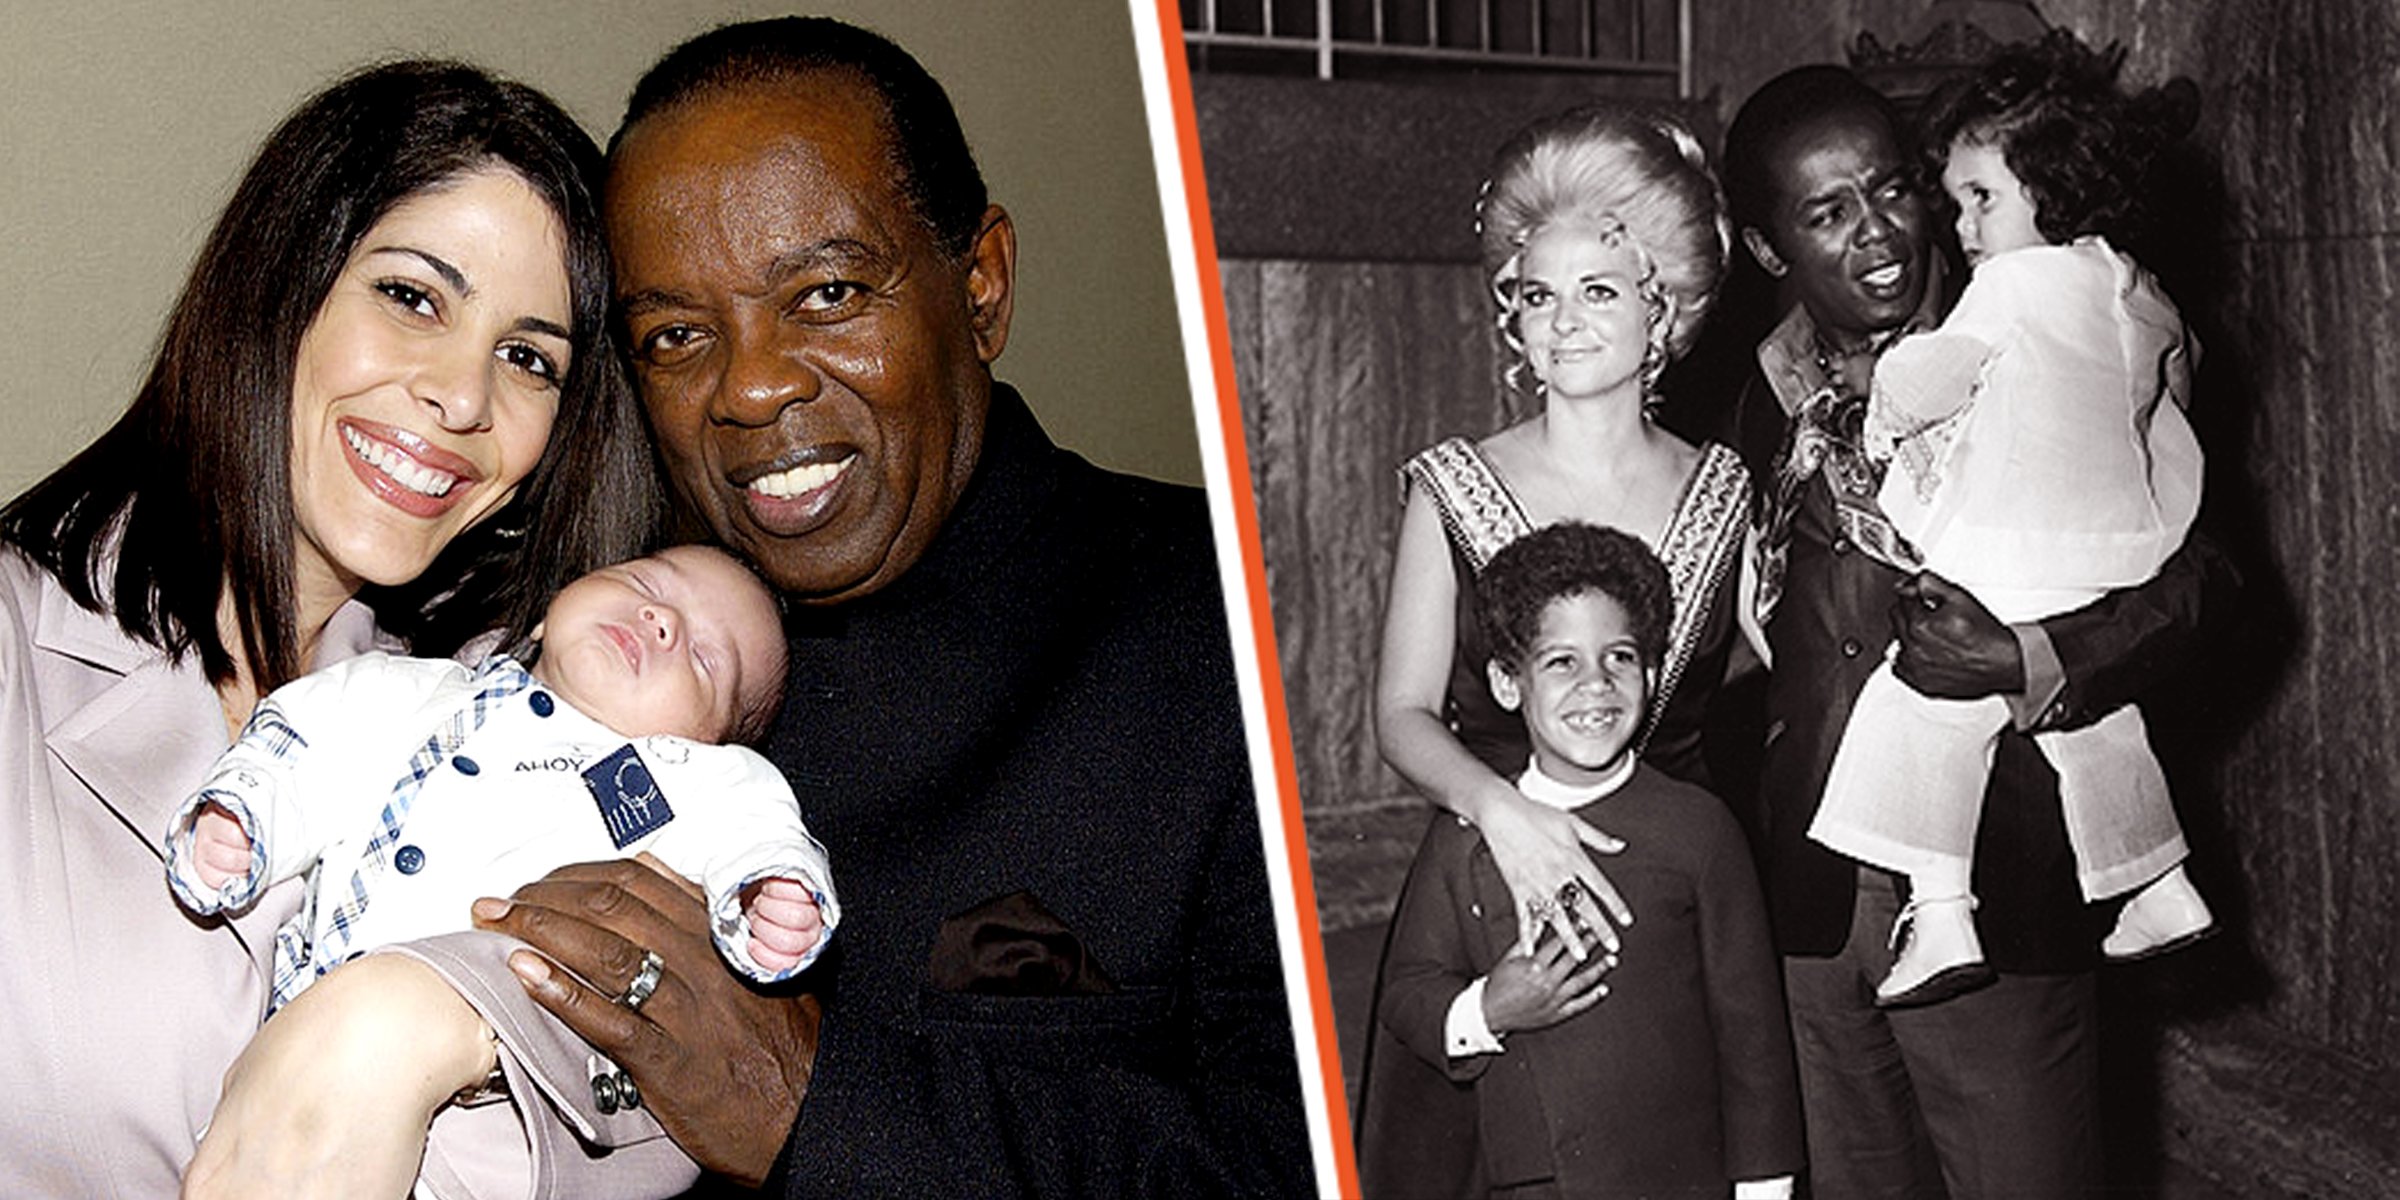 Lou Rawls' Beloved Exwife Filed Police Complaint against His Daughter